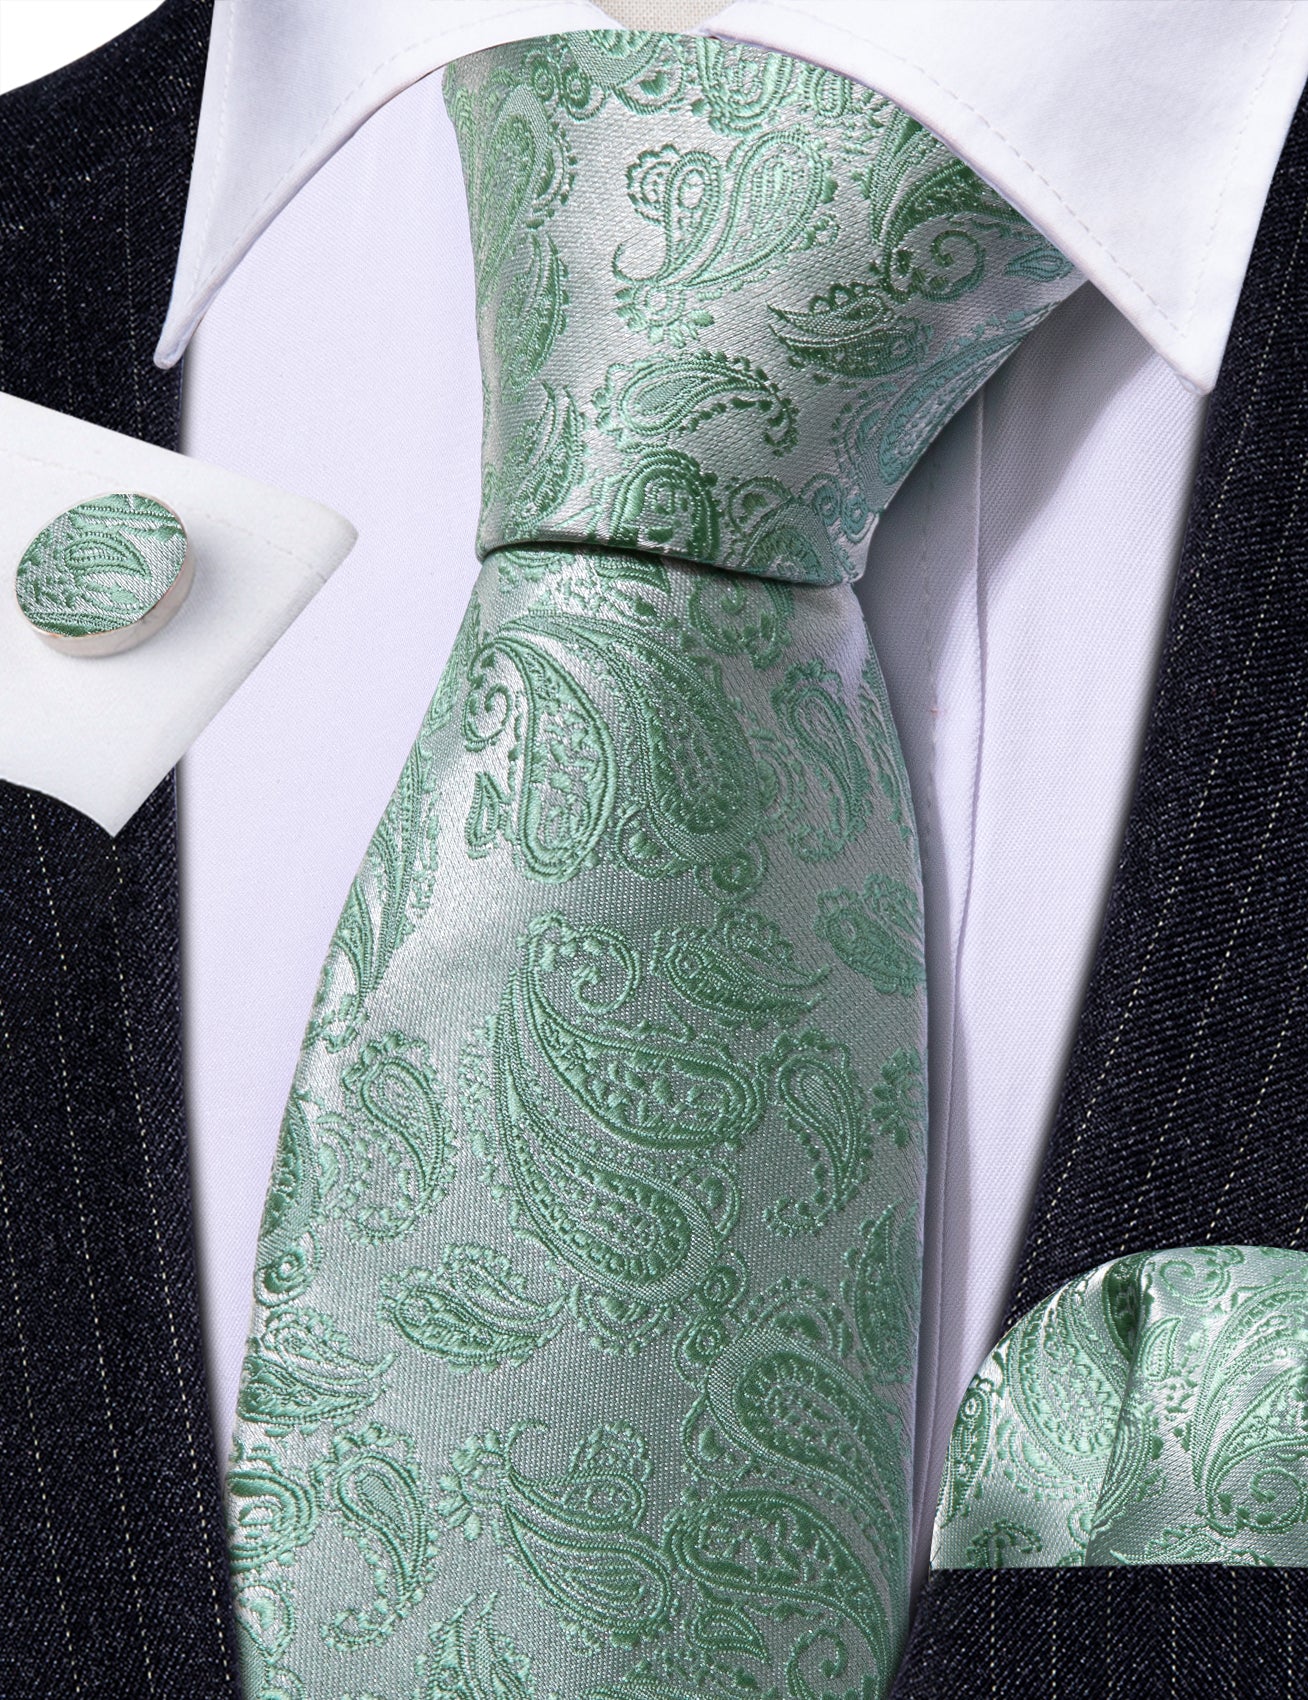 Barry Wang Green Silver Paisley Silk 63 Inches Extra Long Tie Hanky Cufflinks Set